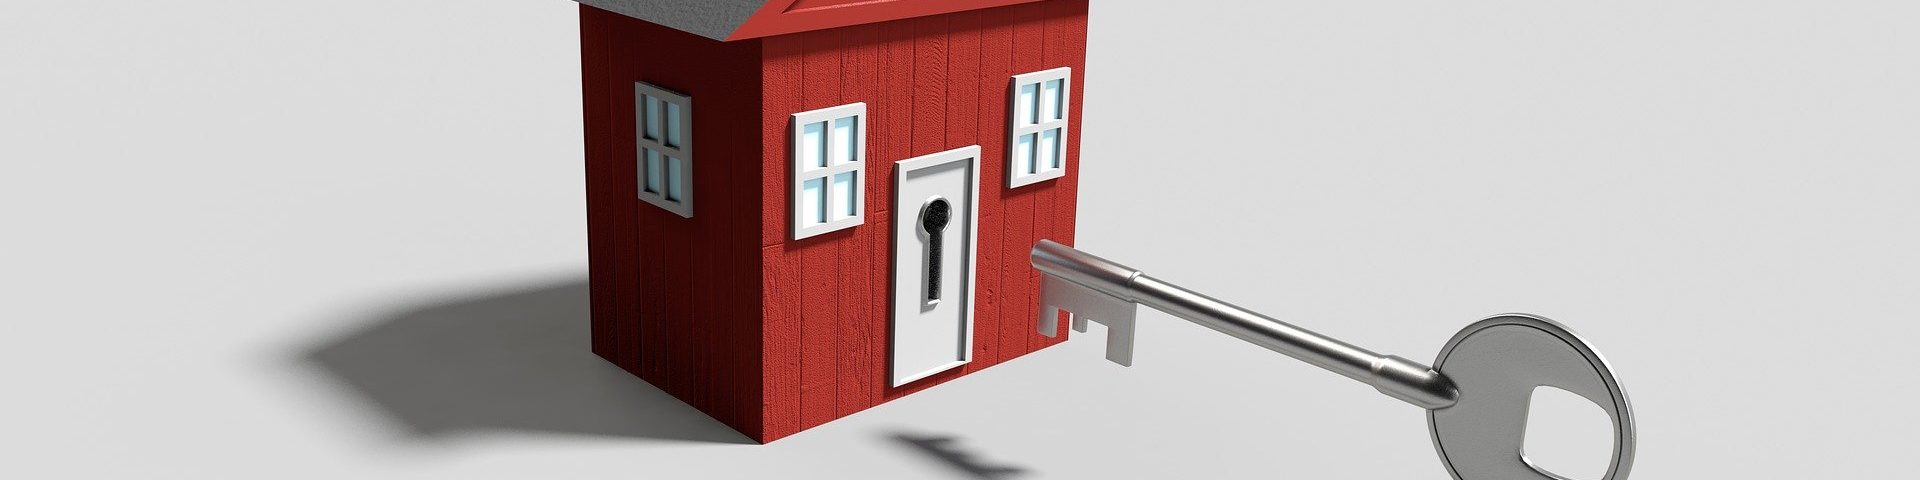 House with key